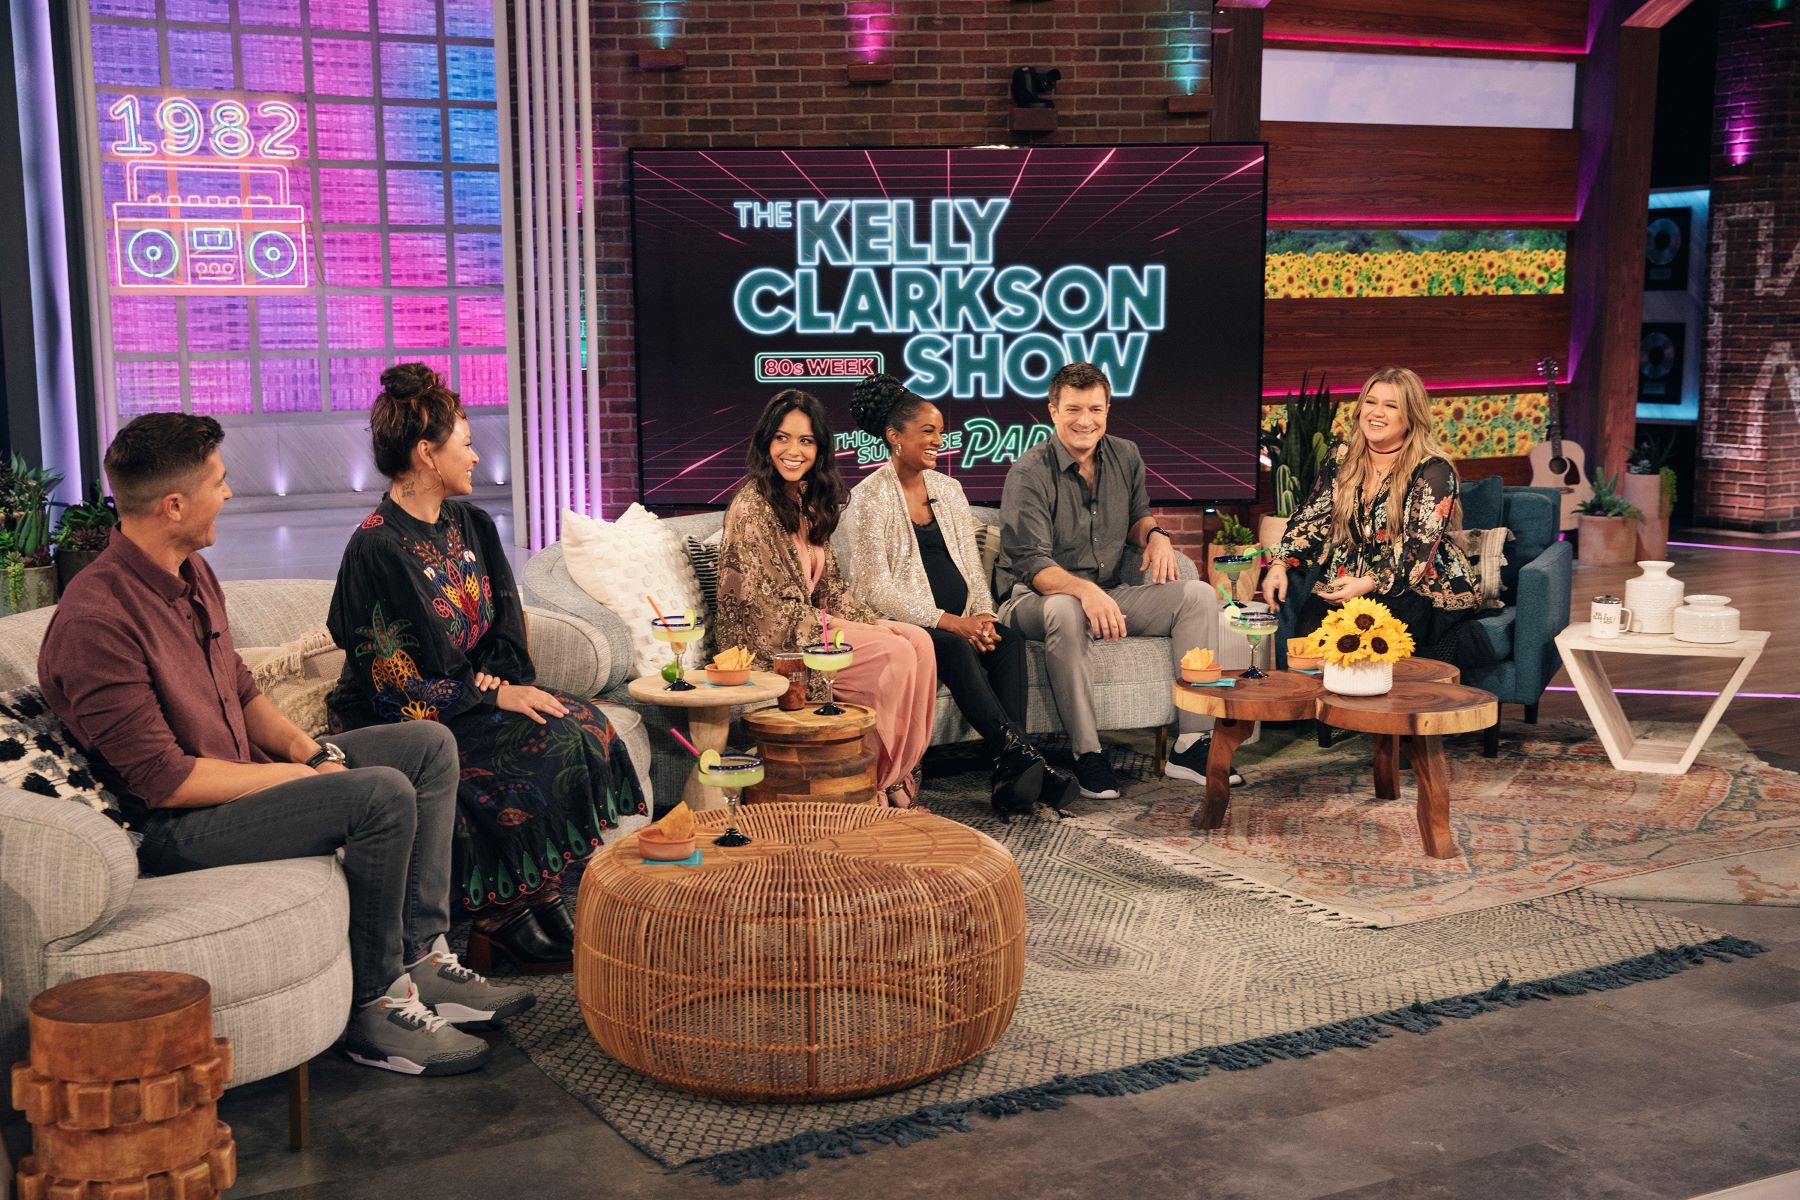 Eric Winter, Melissa O'Neil, Alyssa Diaz, Mekia Cox, Nathan Fillion, and Kelly Clarkson, who will all star in 'The Rookie' Season 5 Episode 12, appear on 'The Kelly Clarkson Show.' Winter and O'Neil sit on the couch on the left, Diaz, Cox, and Fillion sit on the couch in the middle, and Clarkson sits in an armchair on the right.